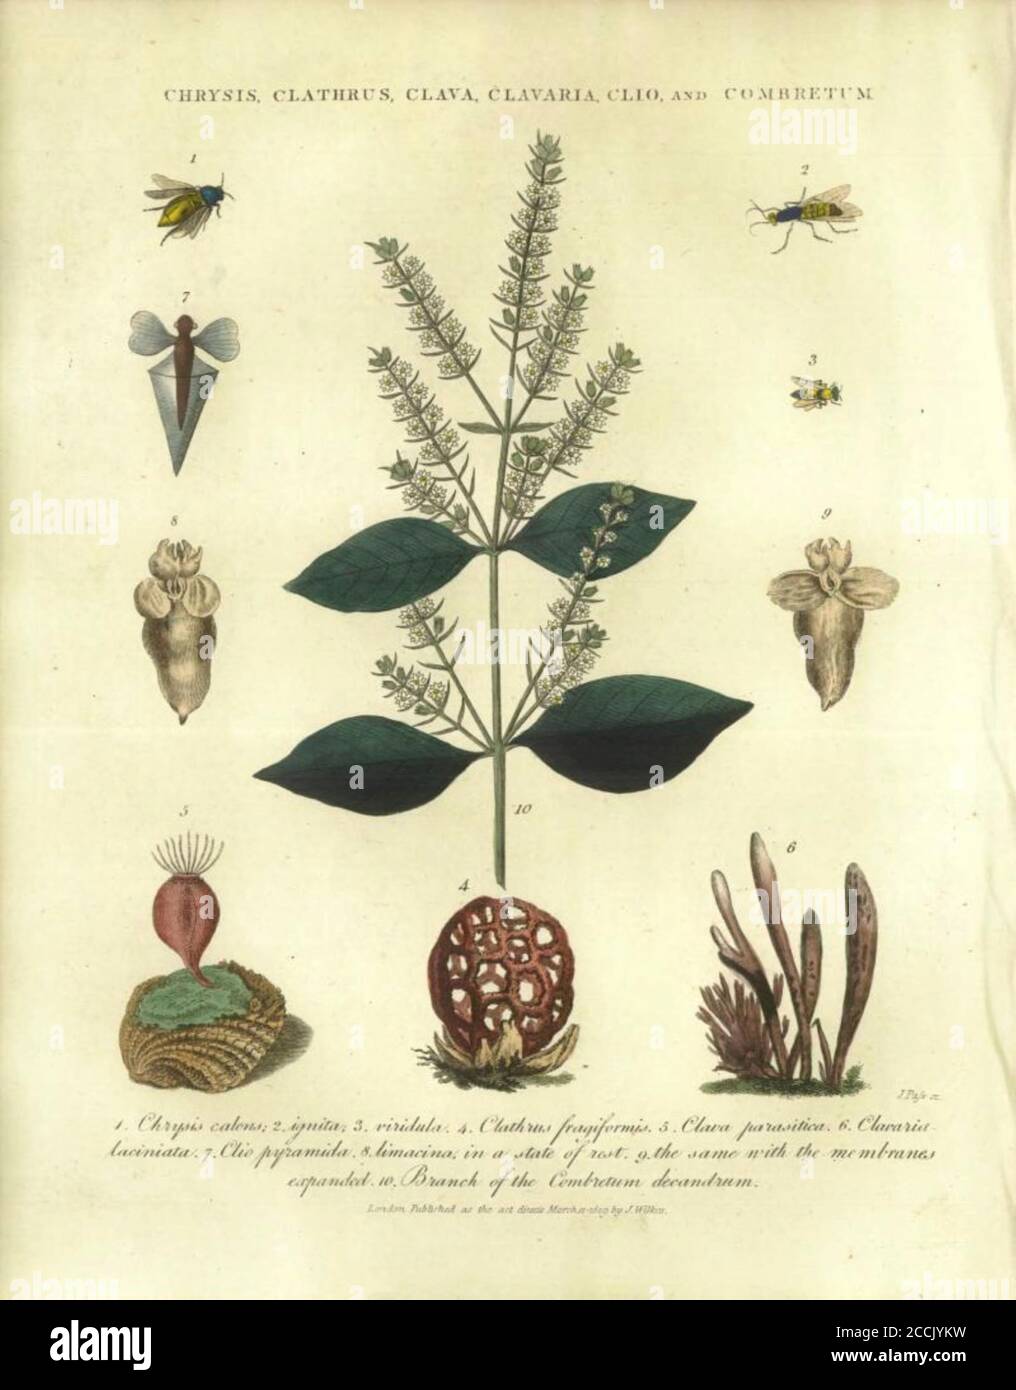 Chrysis (wasp), Clathrus (fungi), Clava (hydrozoa), Clavaria (fungi), Clio (Sea snail) and Combretum (Combretaceae) Handcolored copperplate engraving From the Encyclopaedia Londinensis or, Universal dictionary of arts, sciences, and literature; Volume IV;  Edited by Wilkes, John. Published in London in 1810 Stock Photo